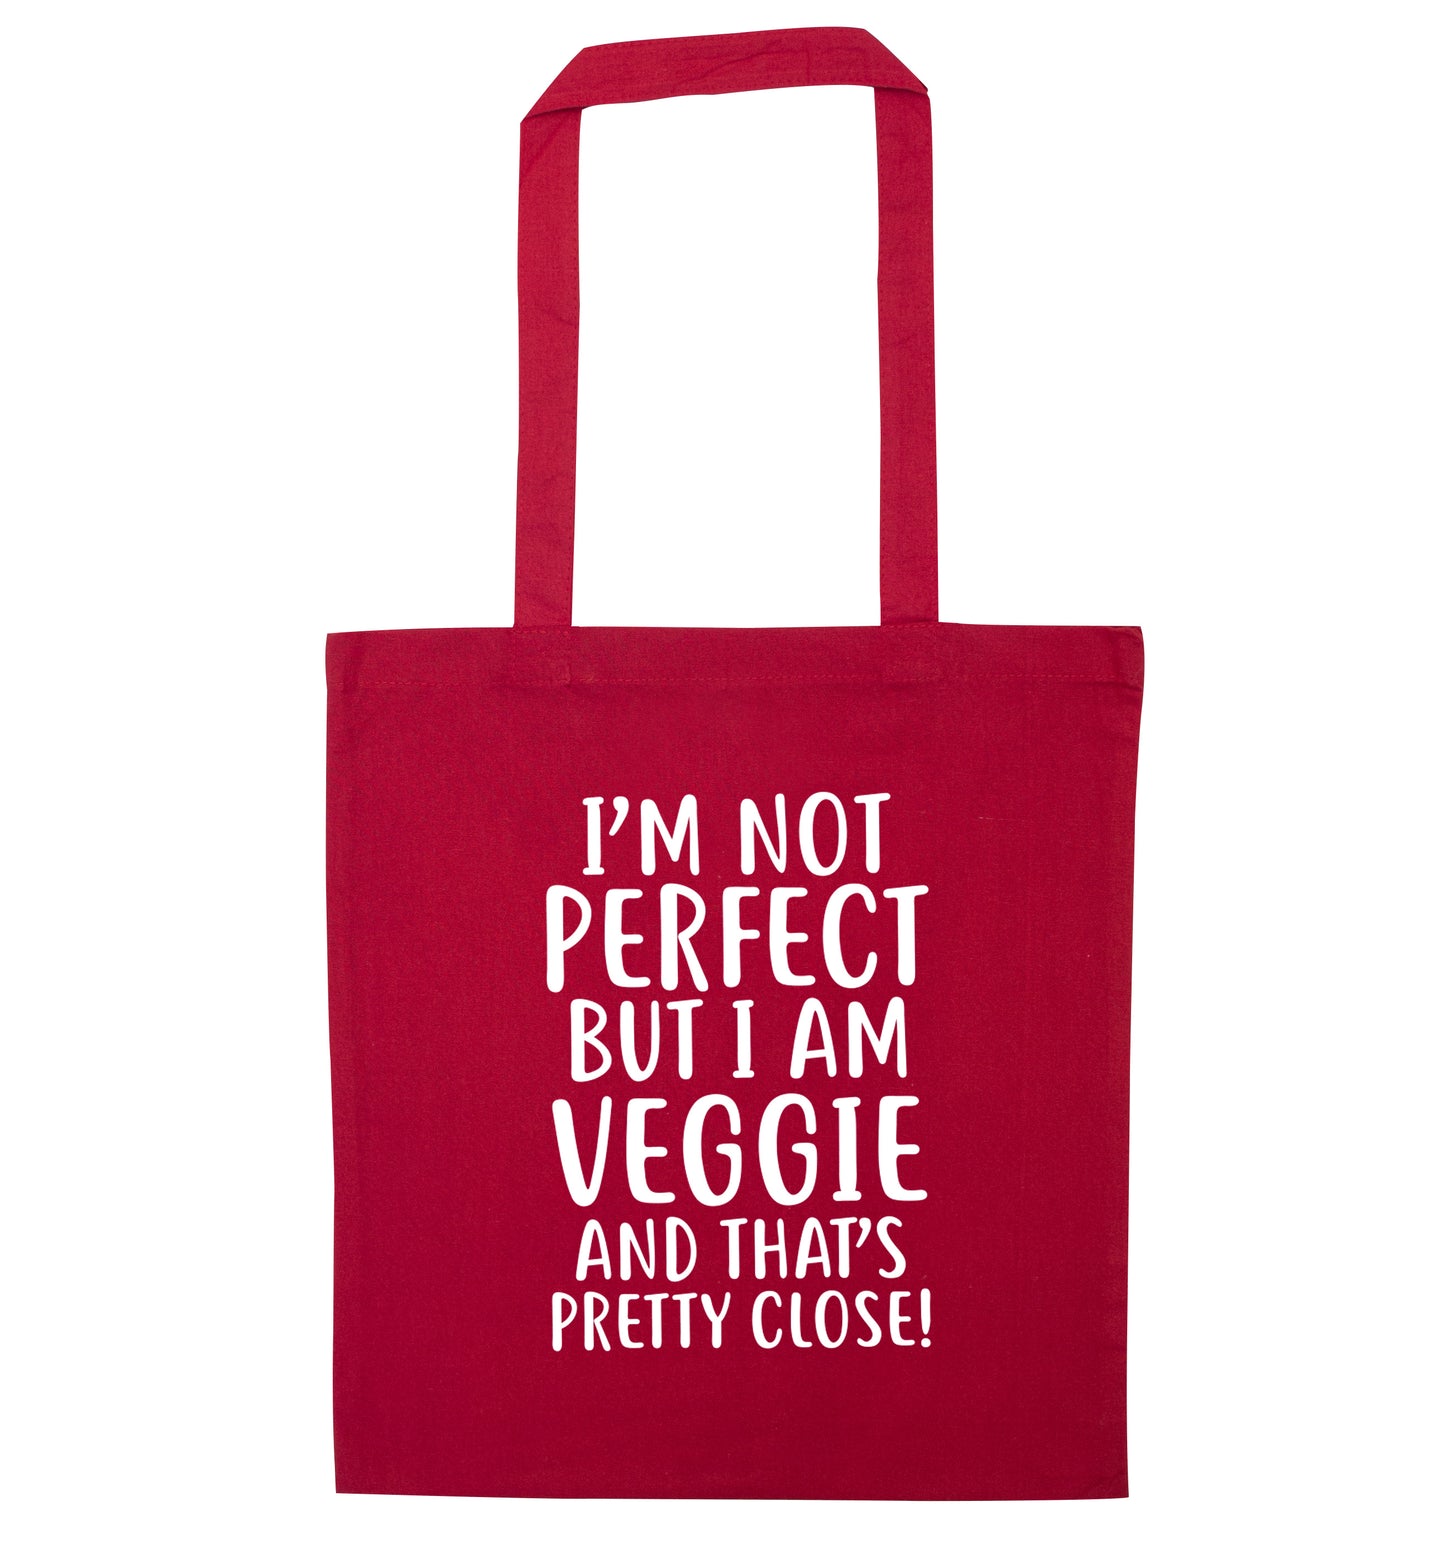 Might not be perfect but I am veggie red tote bag